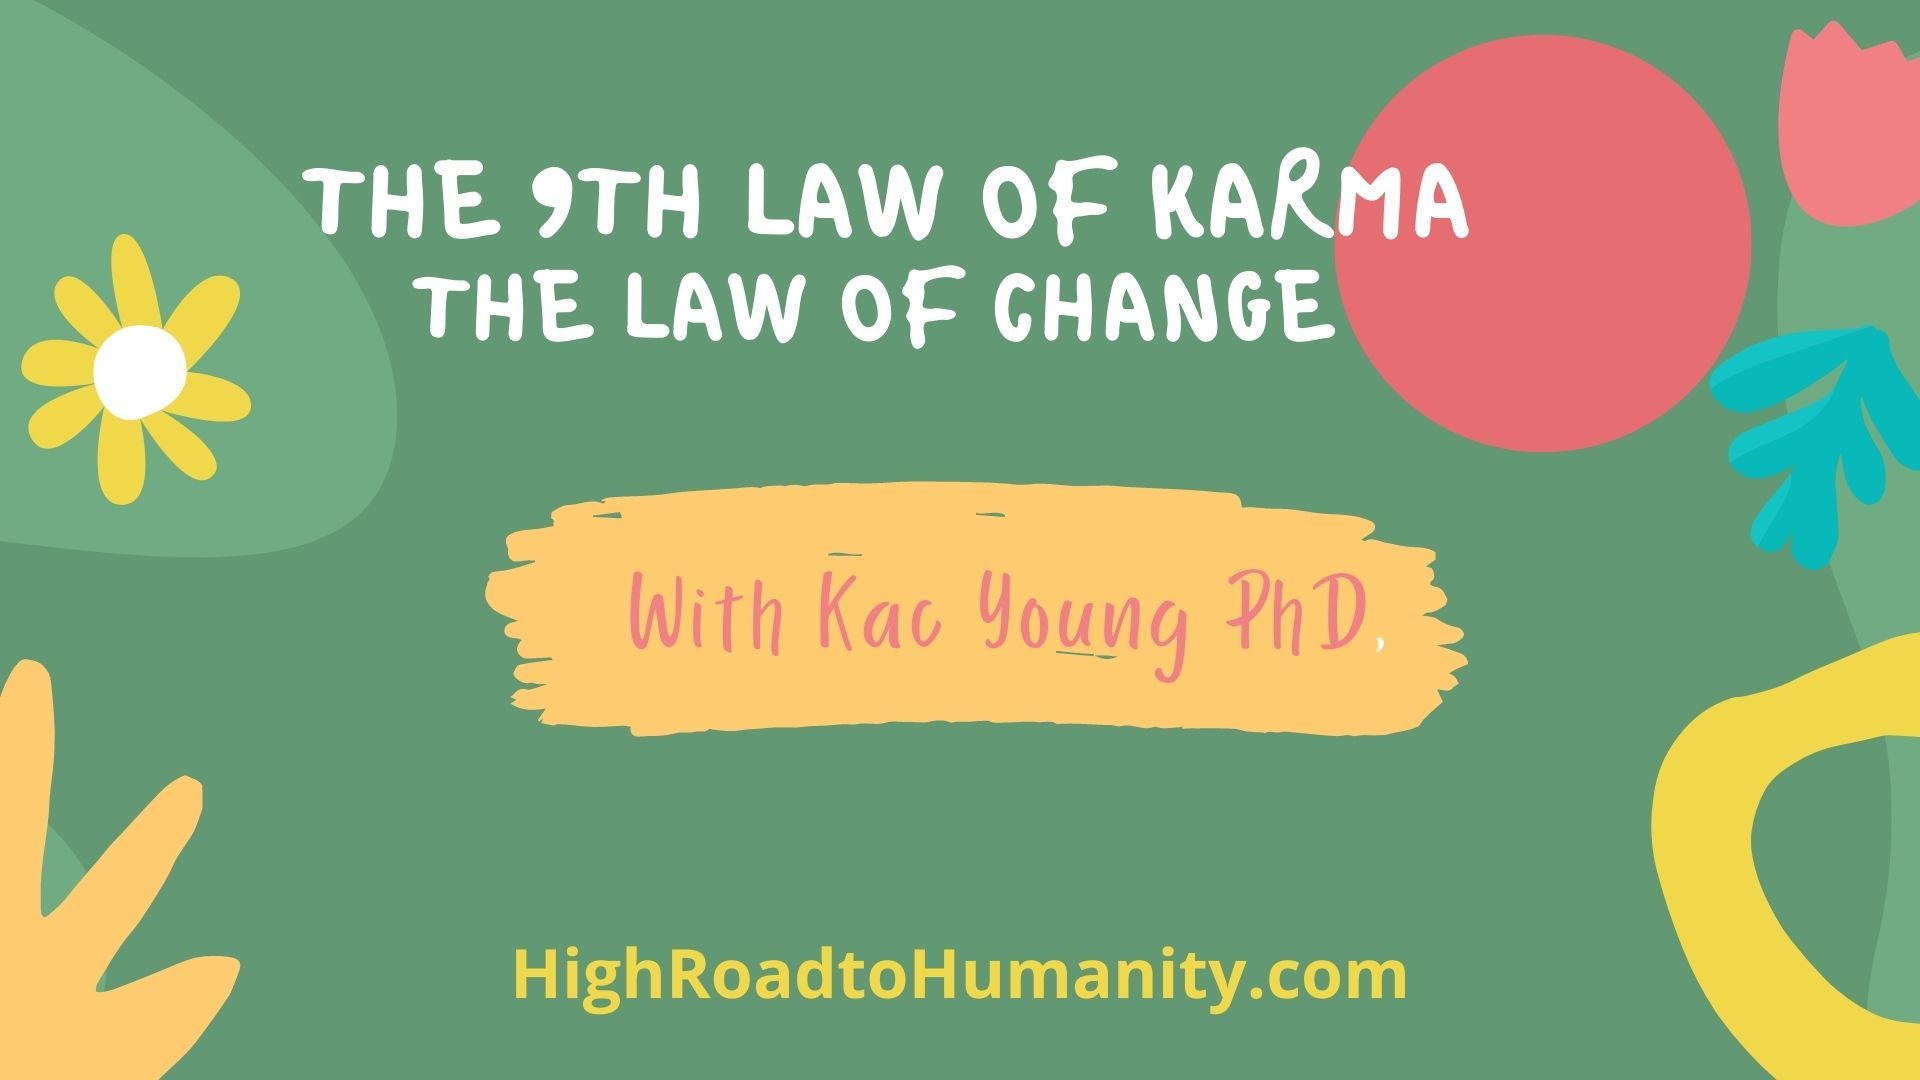 The Law of Change- The 9th Law of Karma